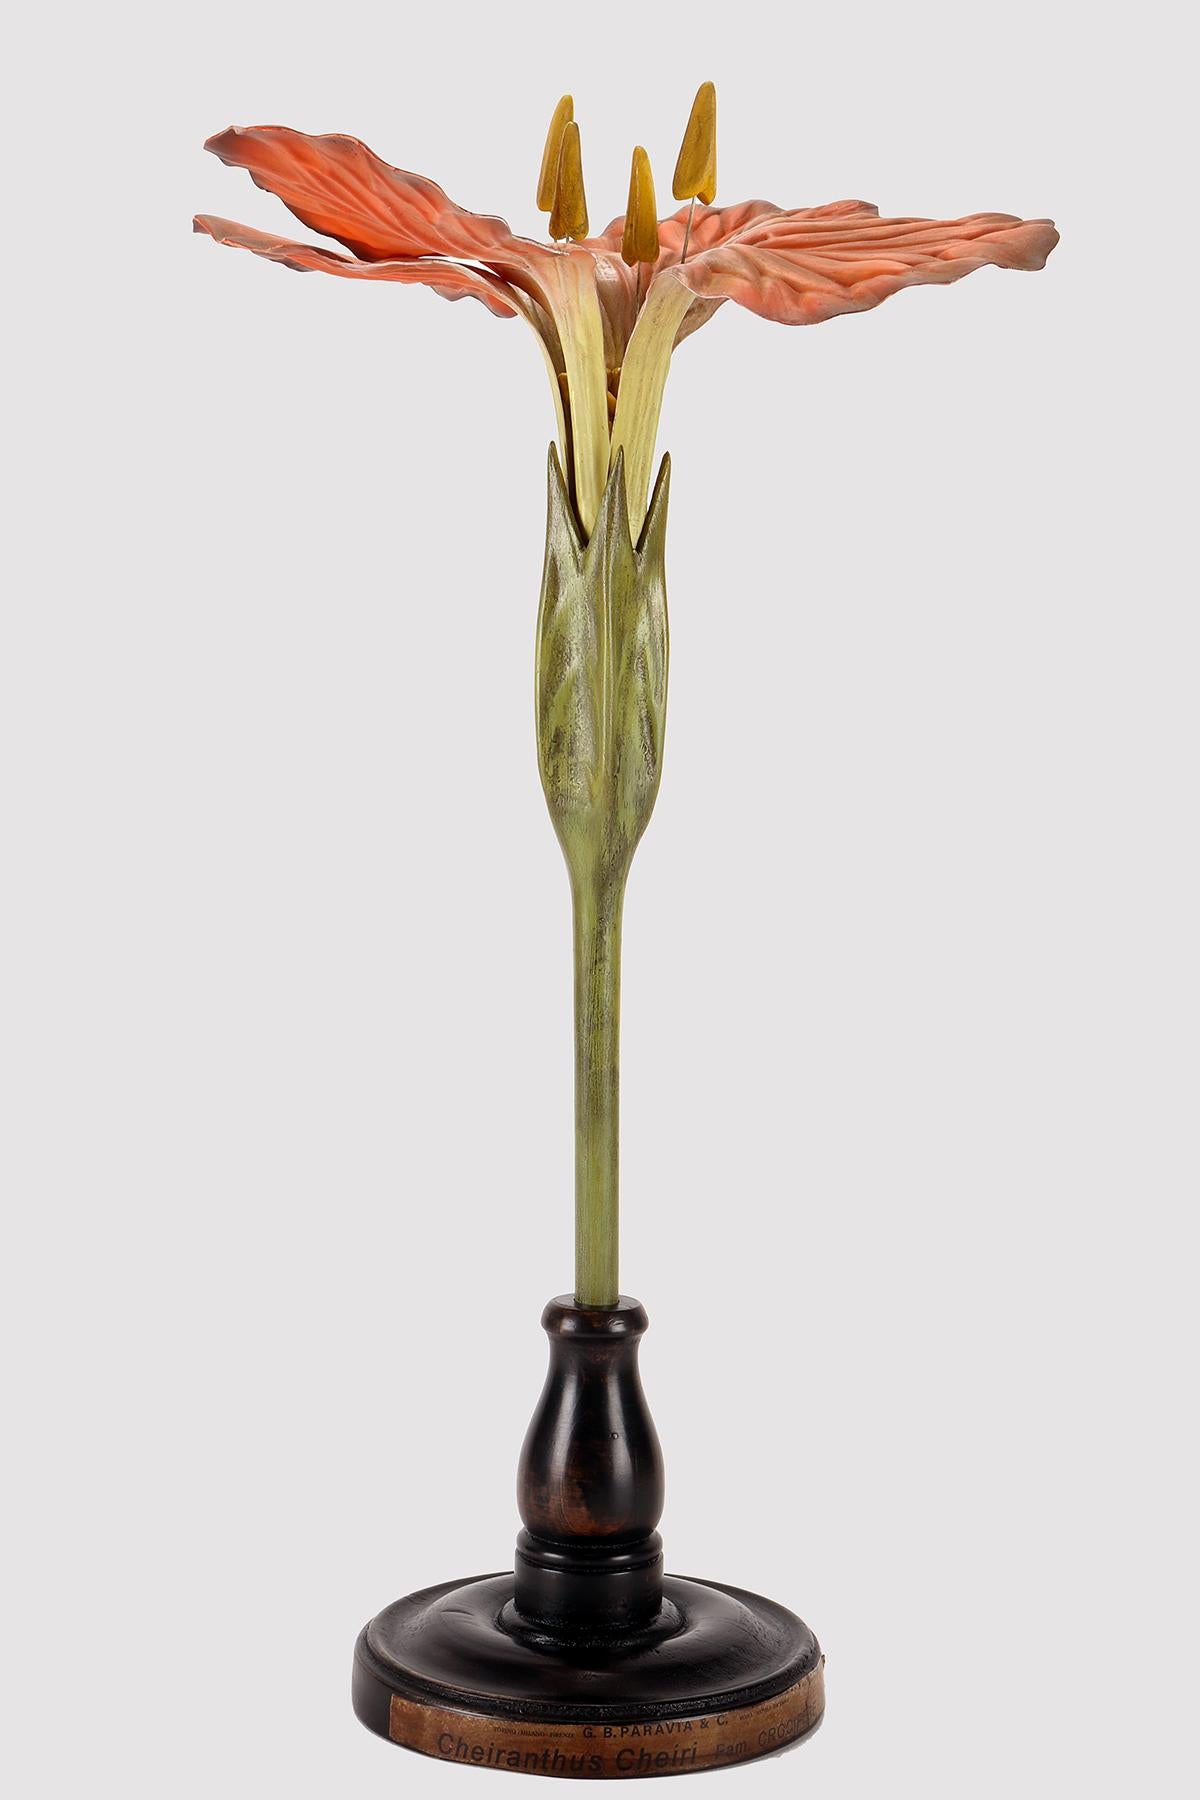 A botanical maquette for didactic use, depicting a flower of orange Wallflower, Cheirantus Cheiris, Cruciferous. Made of metal, paper, plaster, galalith and wood. Extremely detailed. Paravia, Milan, Italy circa 1940.